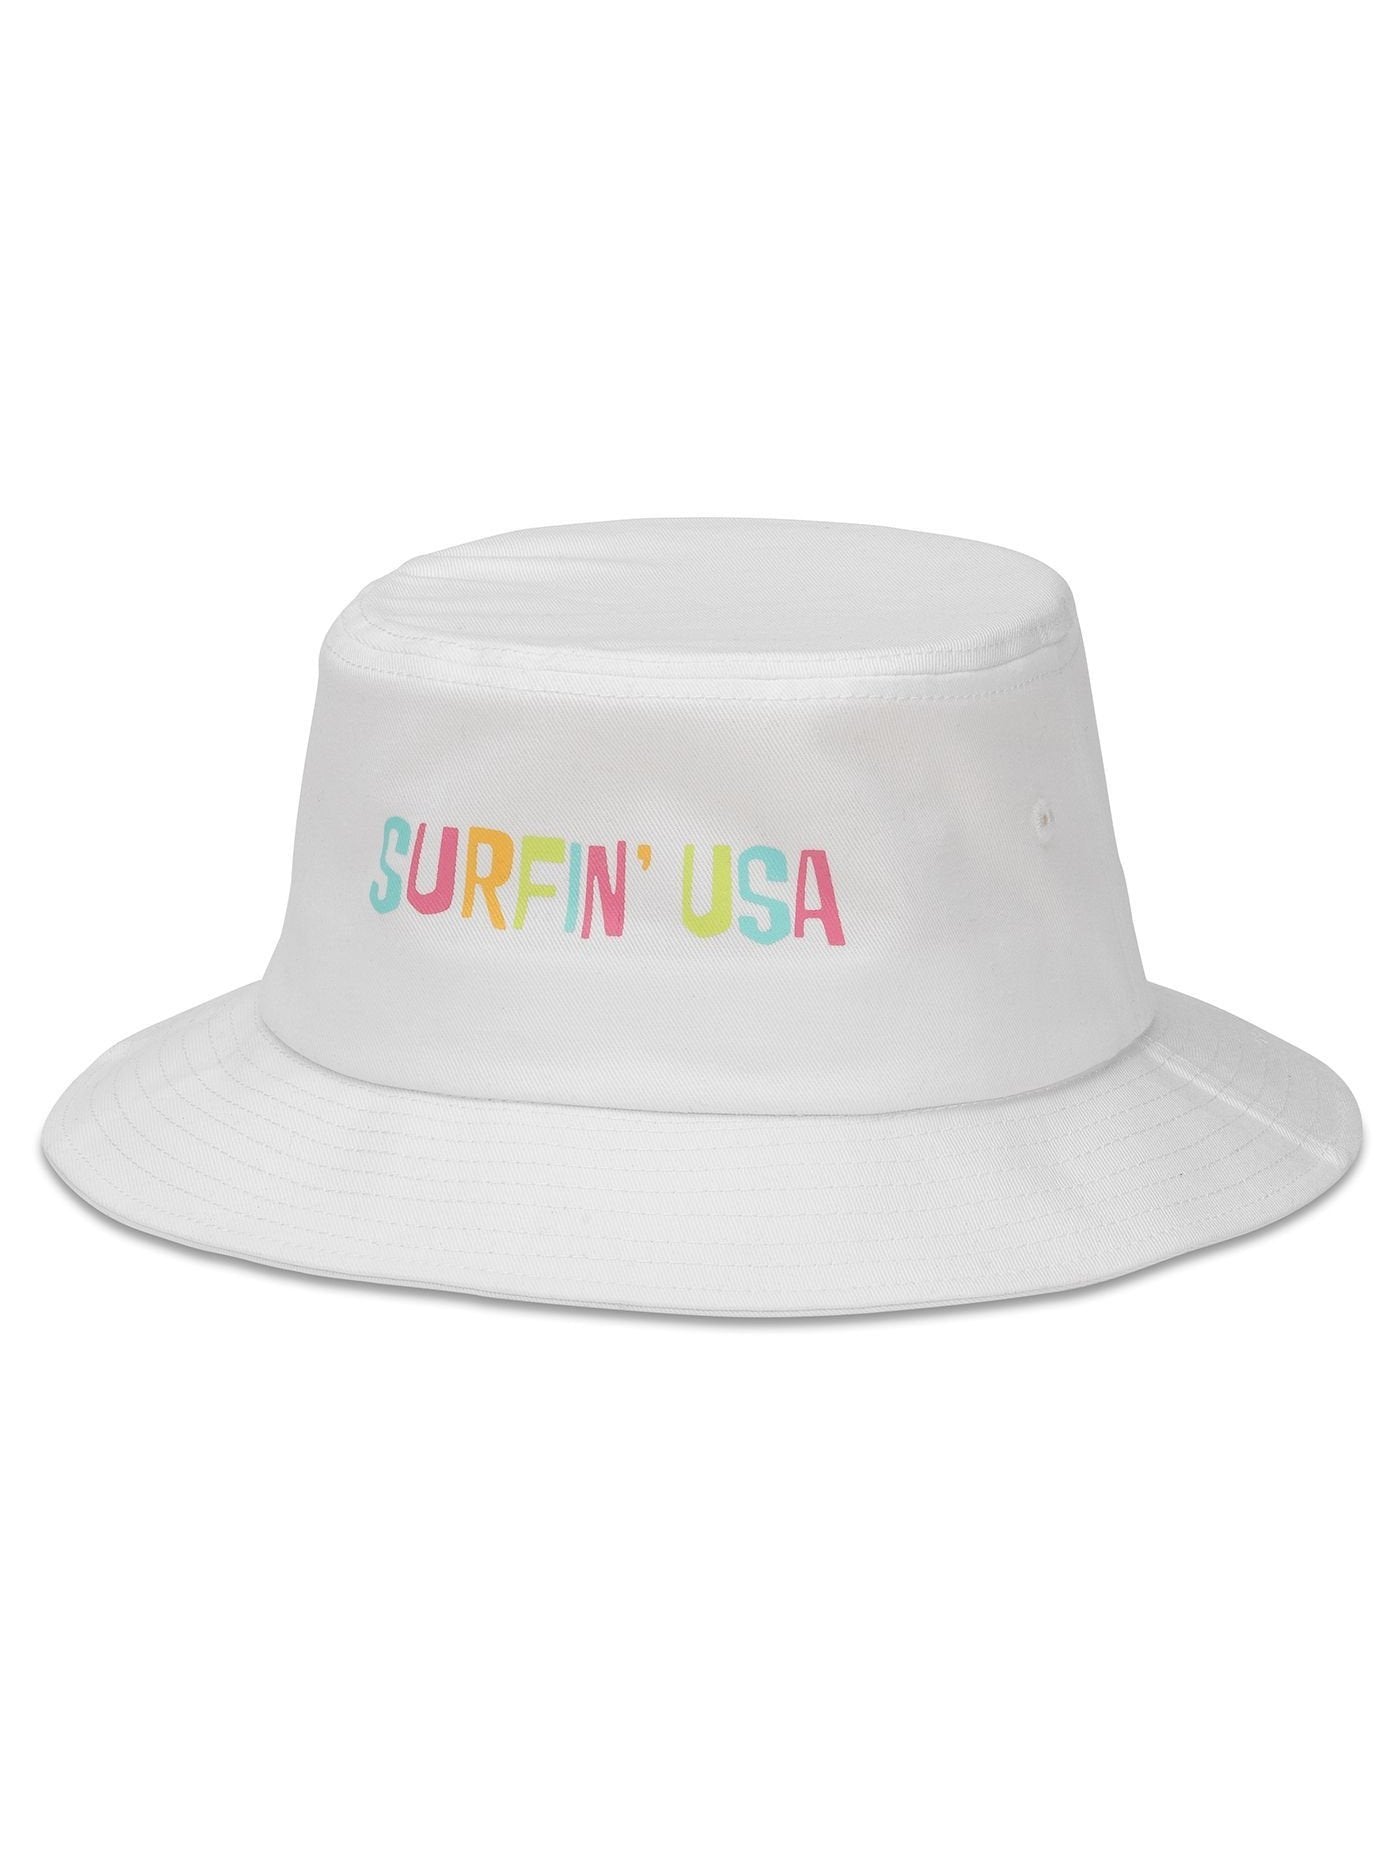 American Needle Surf USA Twill Screen Bucket Hat White 21012A-SURF.